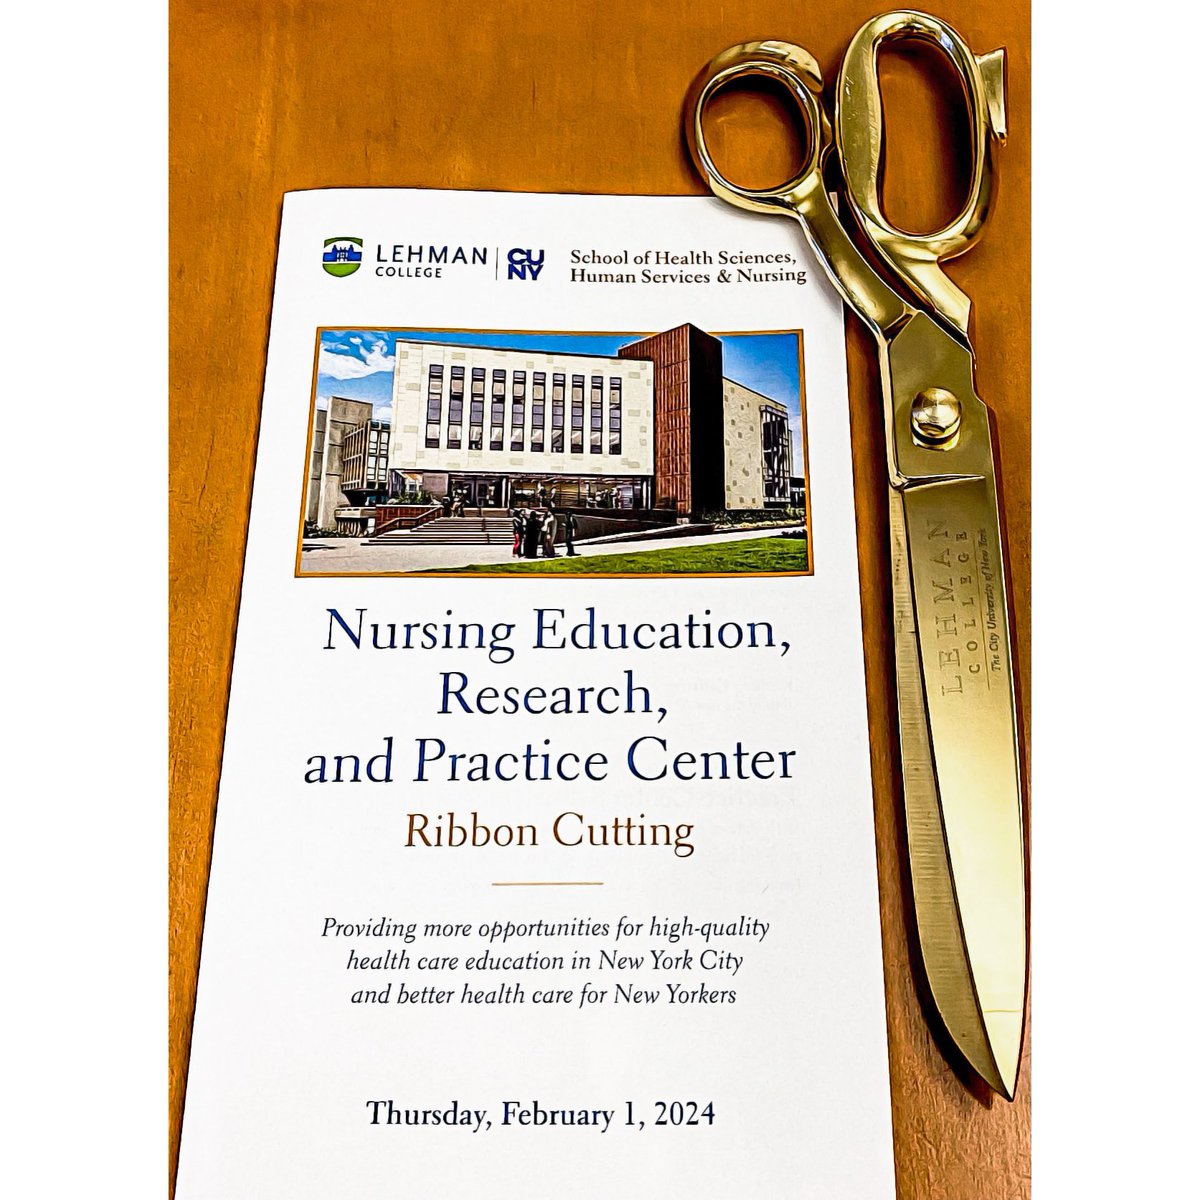 Join us for the grand opening of the Nursing Education, Research, and Practice Center on Thursday, February 1, 2024, from 1 p.m. to 3 p.m. #RibbonCutting